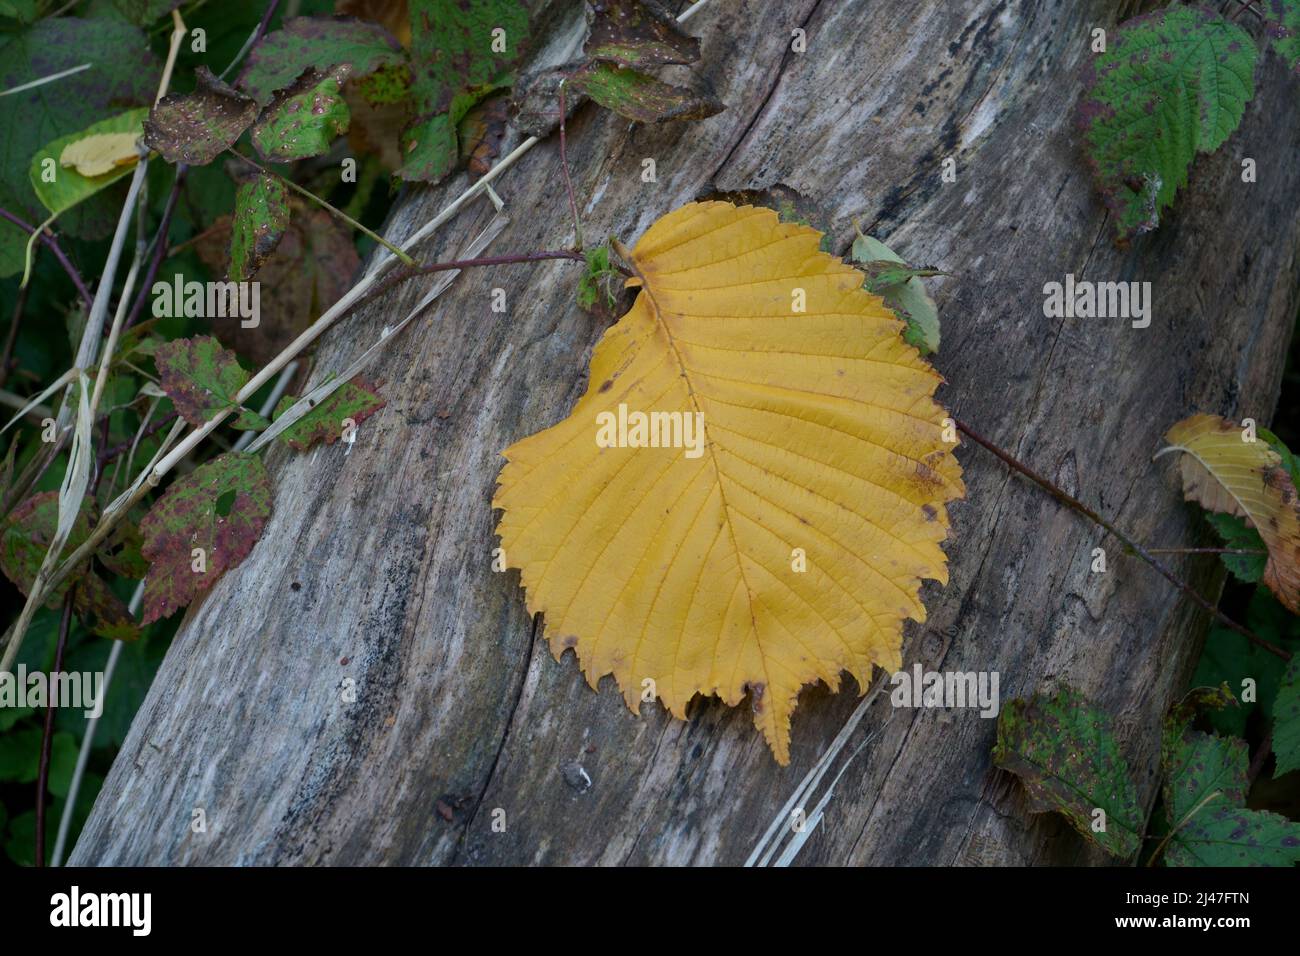 Fallen yellow leaf in autumn season on a dry wood trunk in a wild natural environment. A close-up scenic top view. Fall season still life scene outdoo Stock Photo